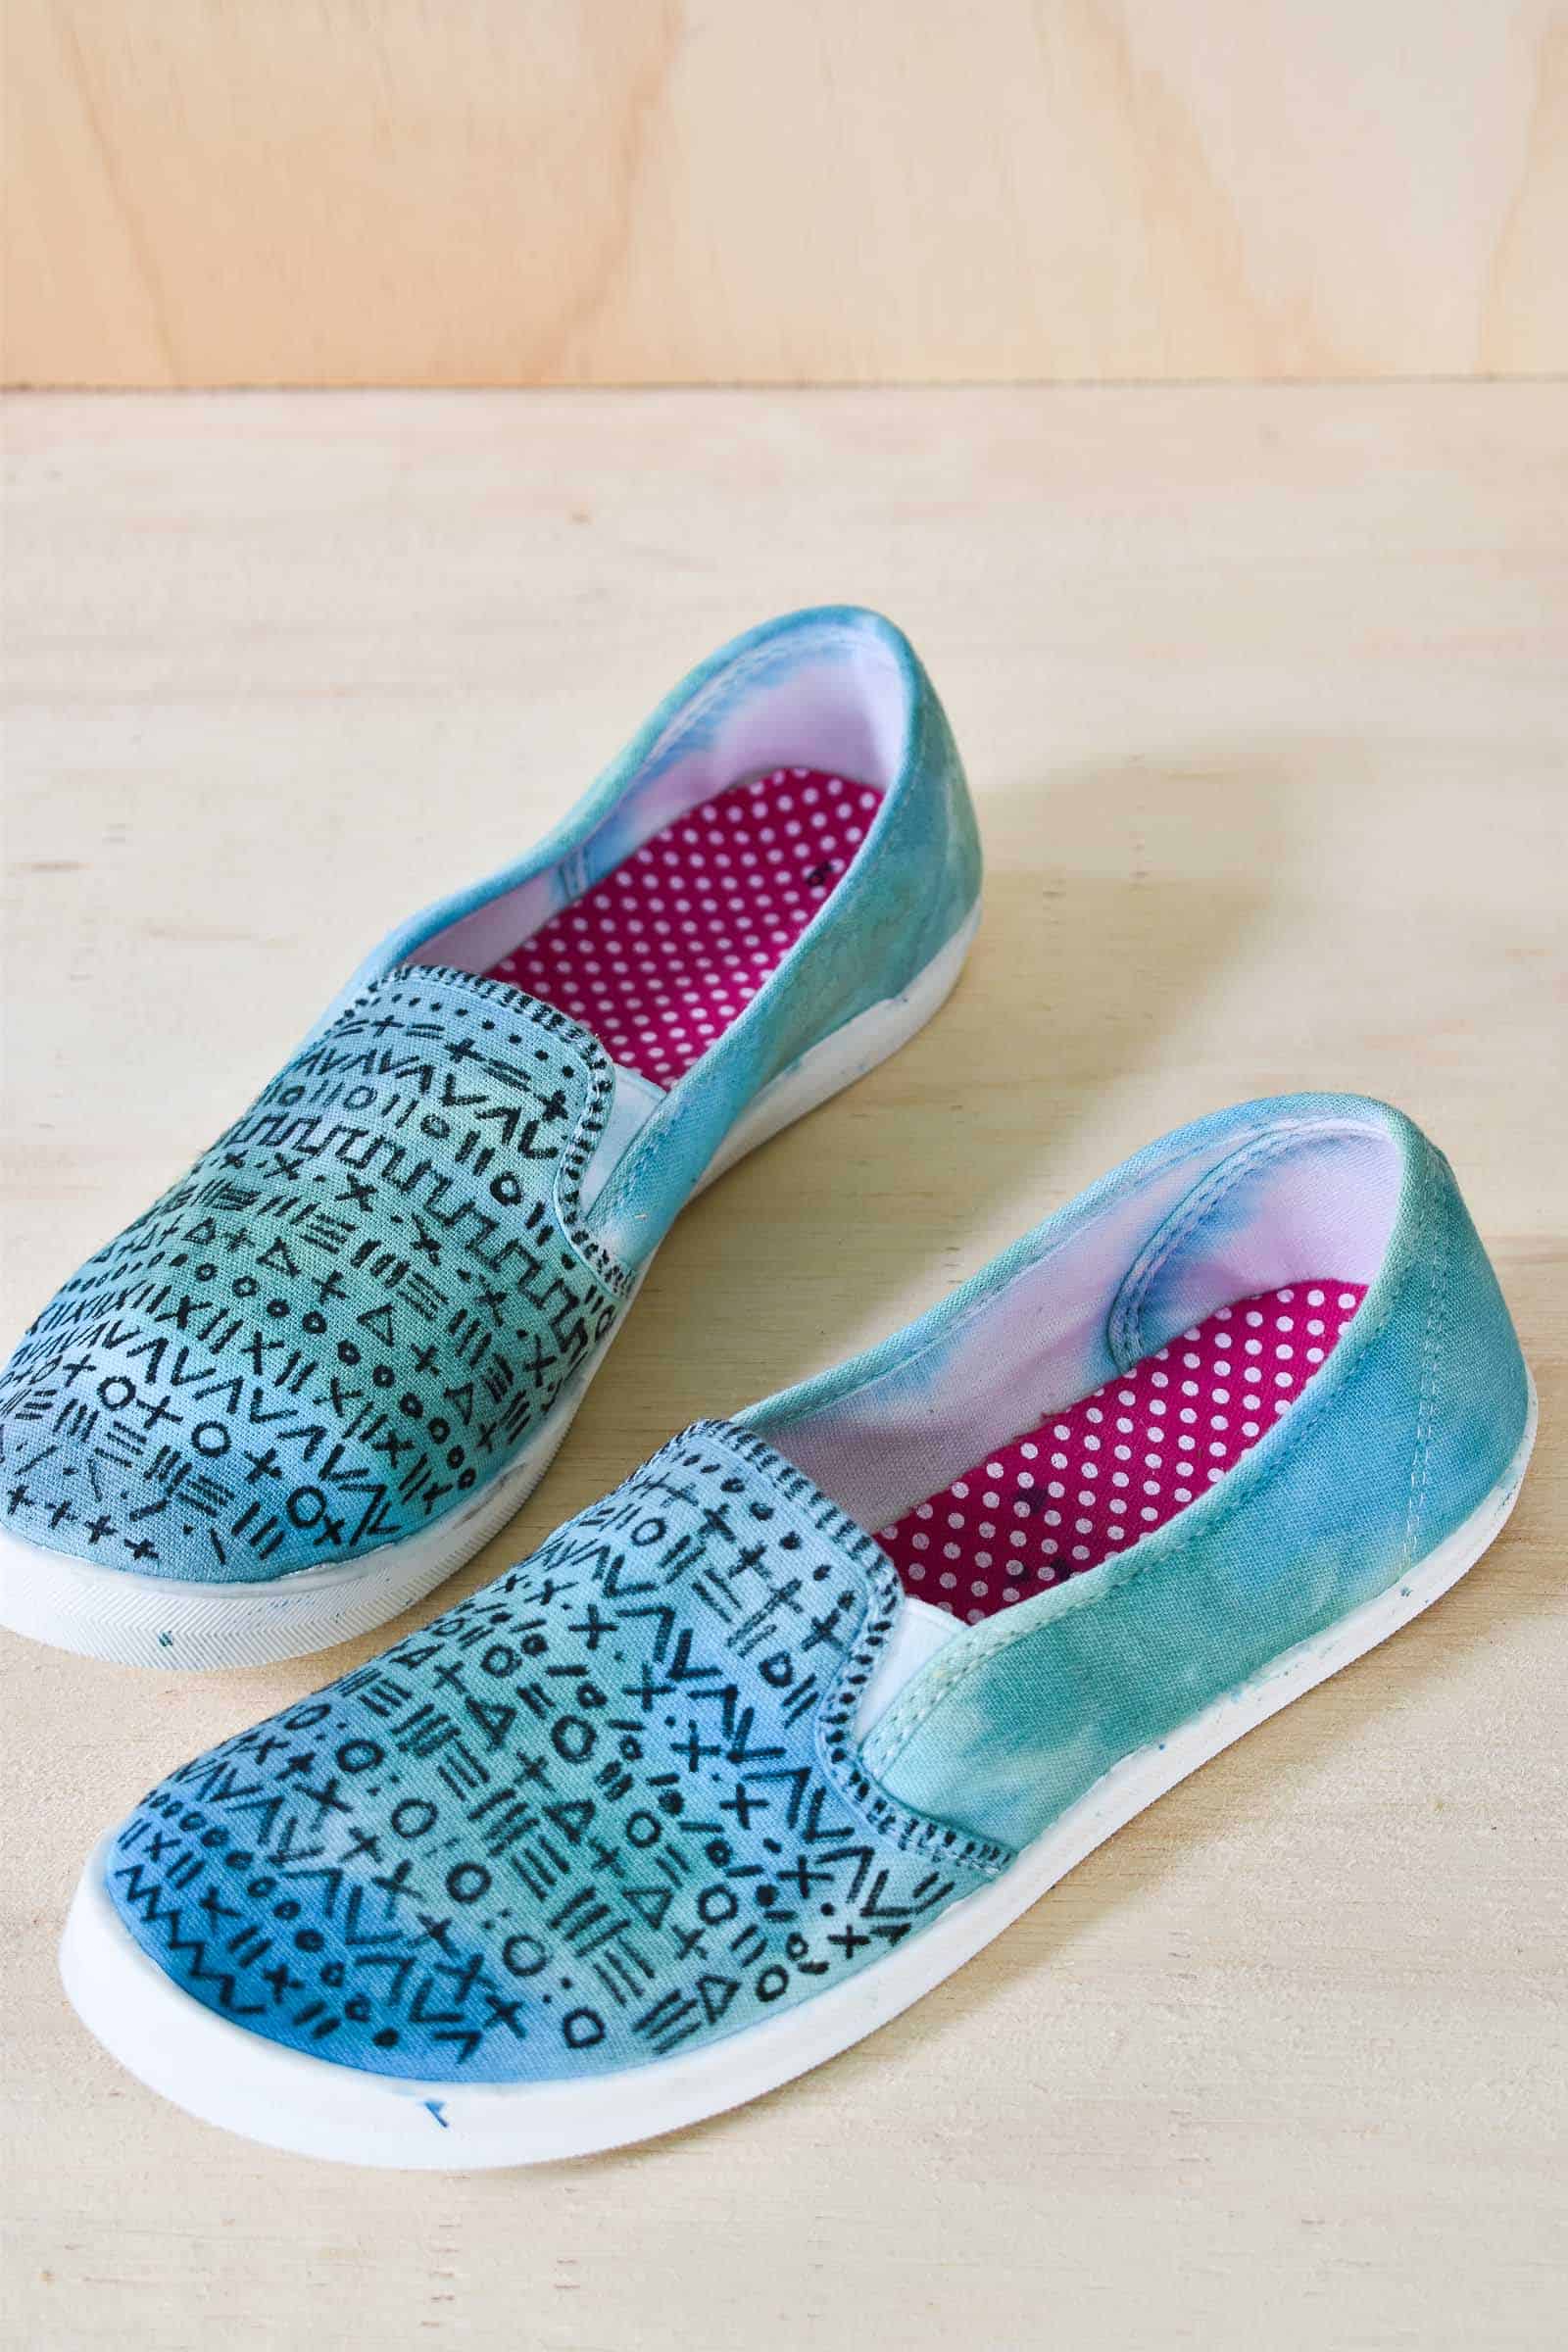 tie dye shoes with pattern on top